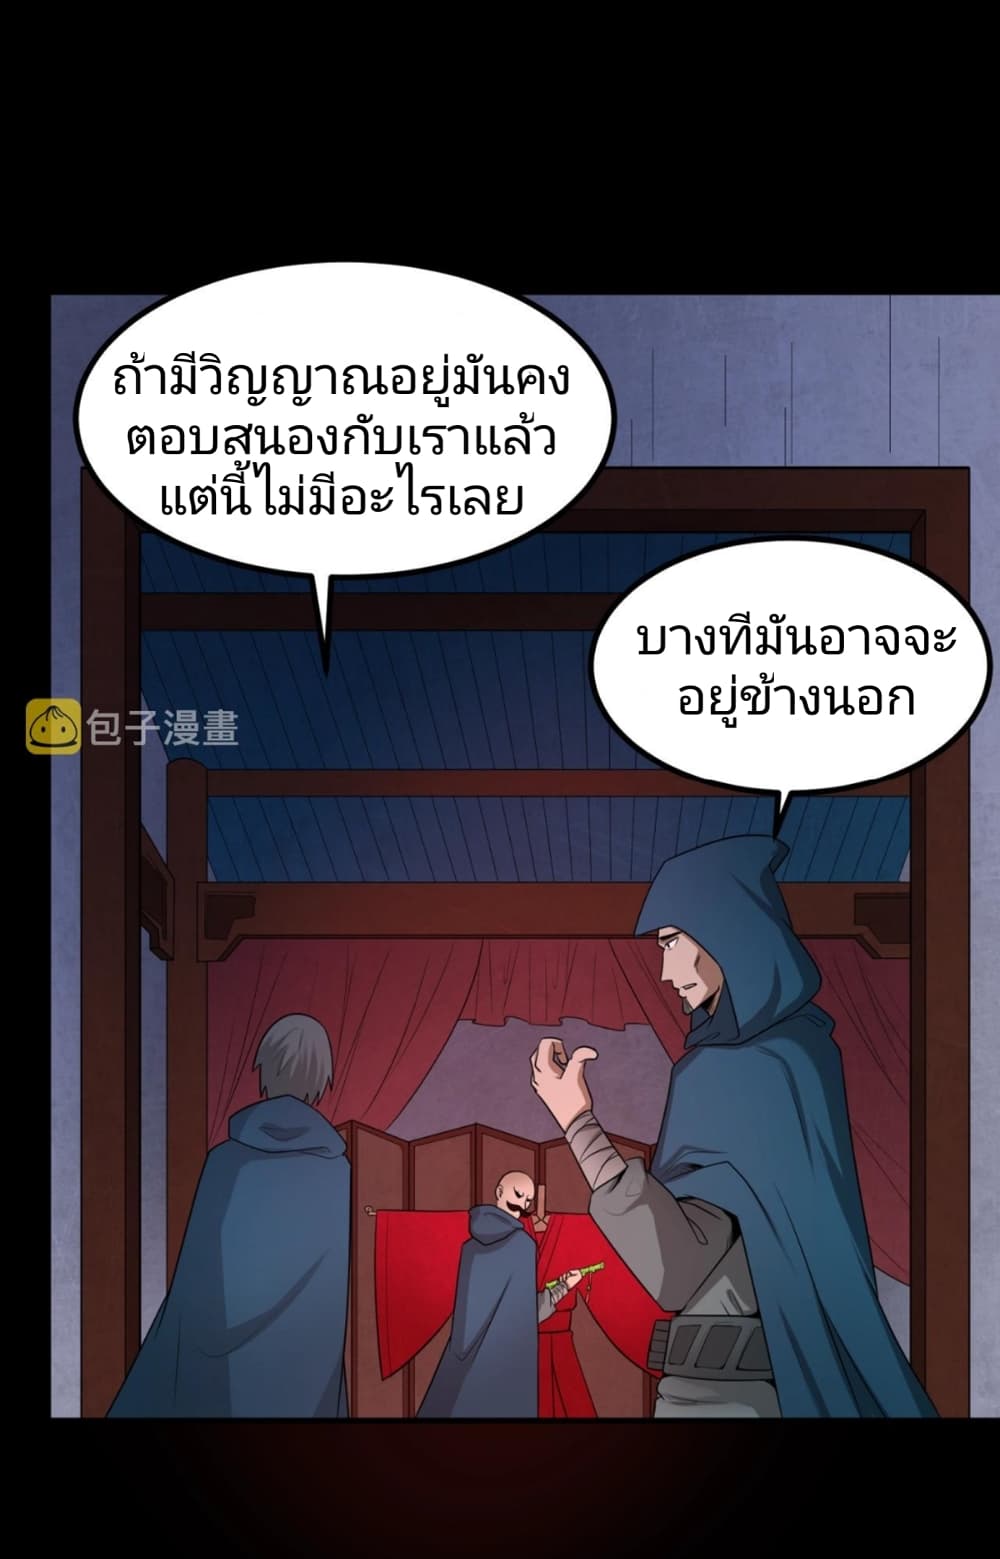 The Age of Ghost Spirits à¸à¸­à¸à¸à¸µà¹ 8 (12)